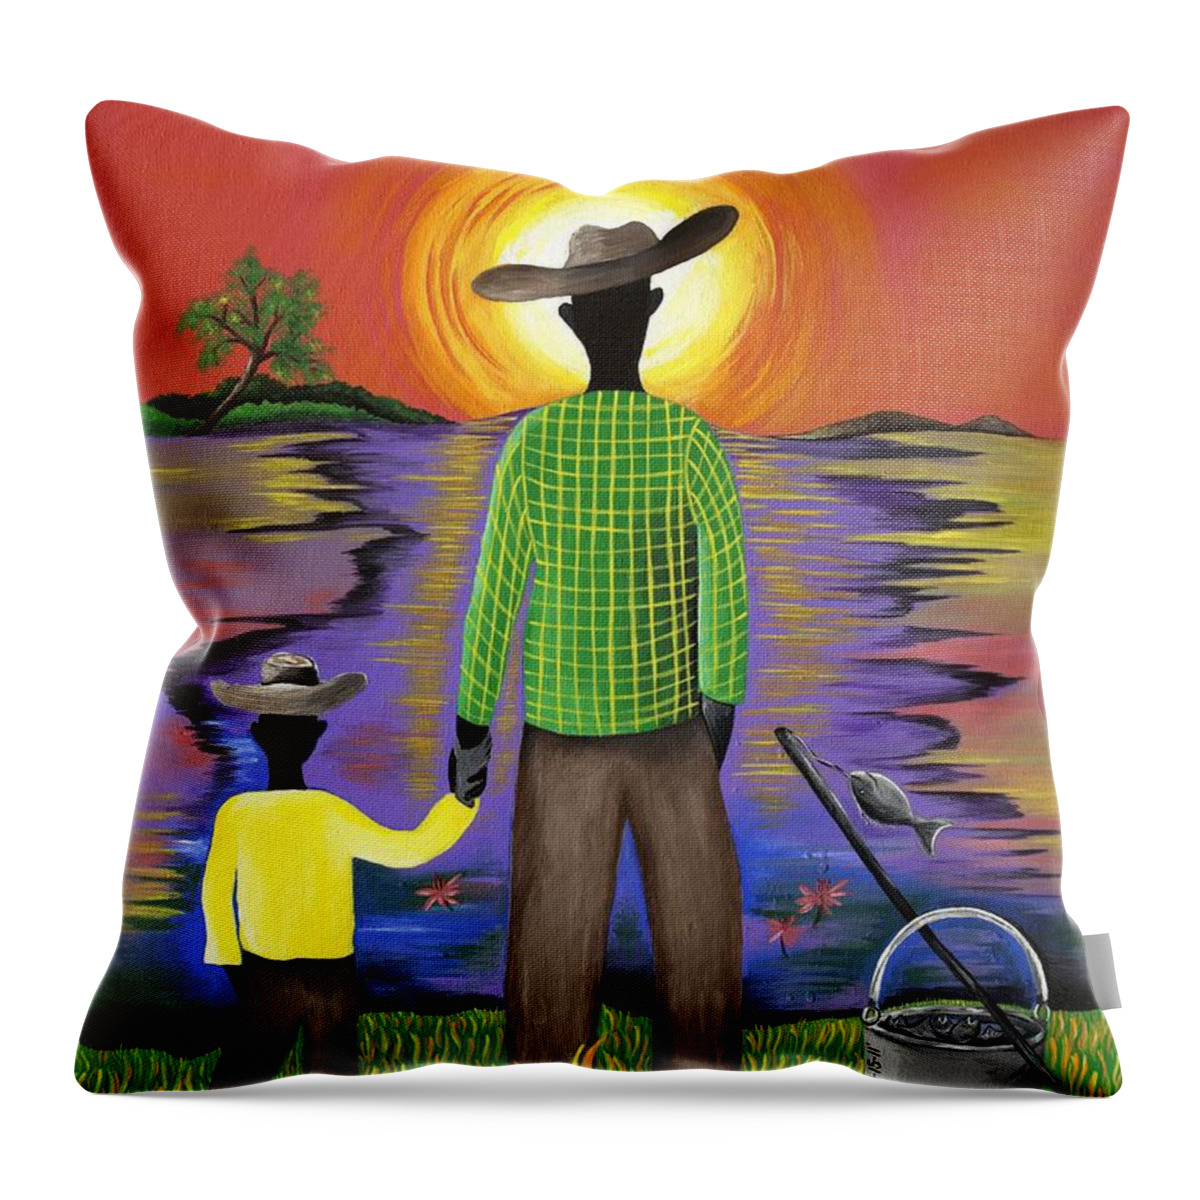 Gullah Art Throw Pillow featuring the painting Son Raise by Patricia Sabreee